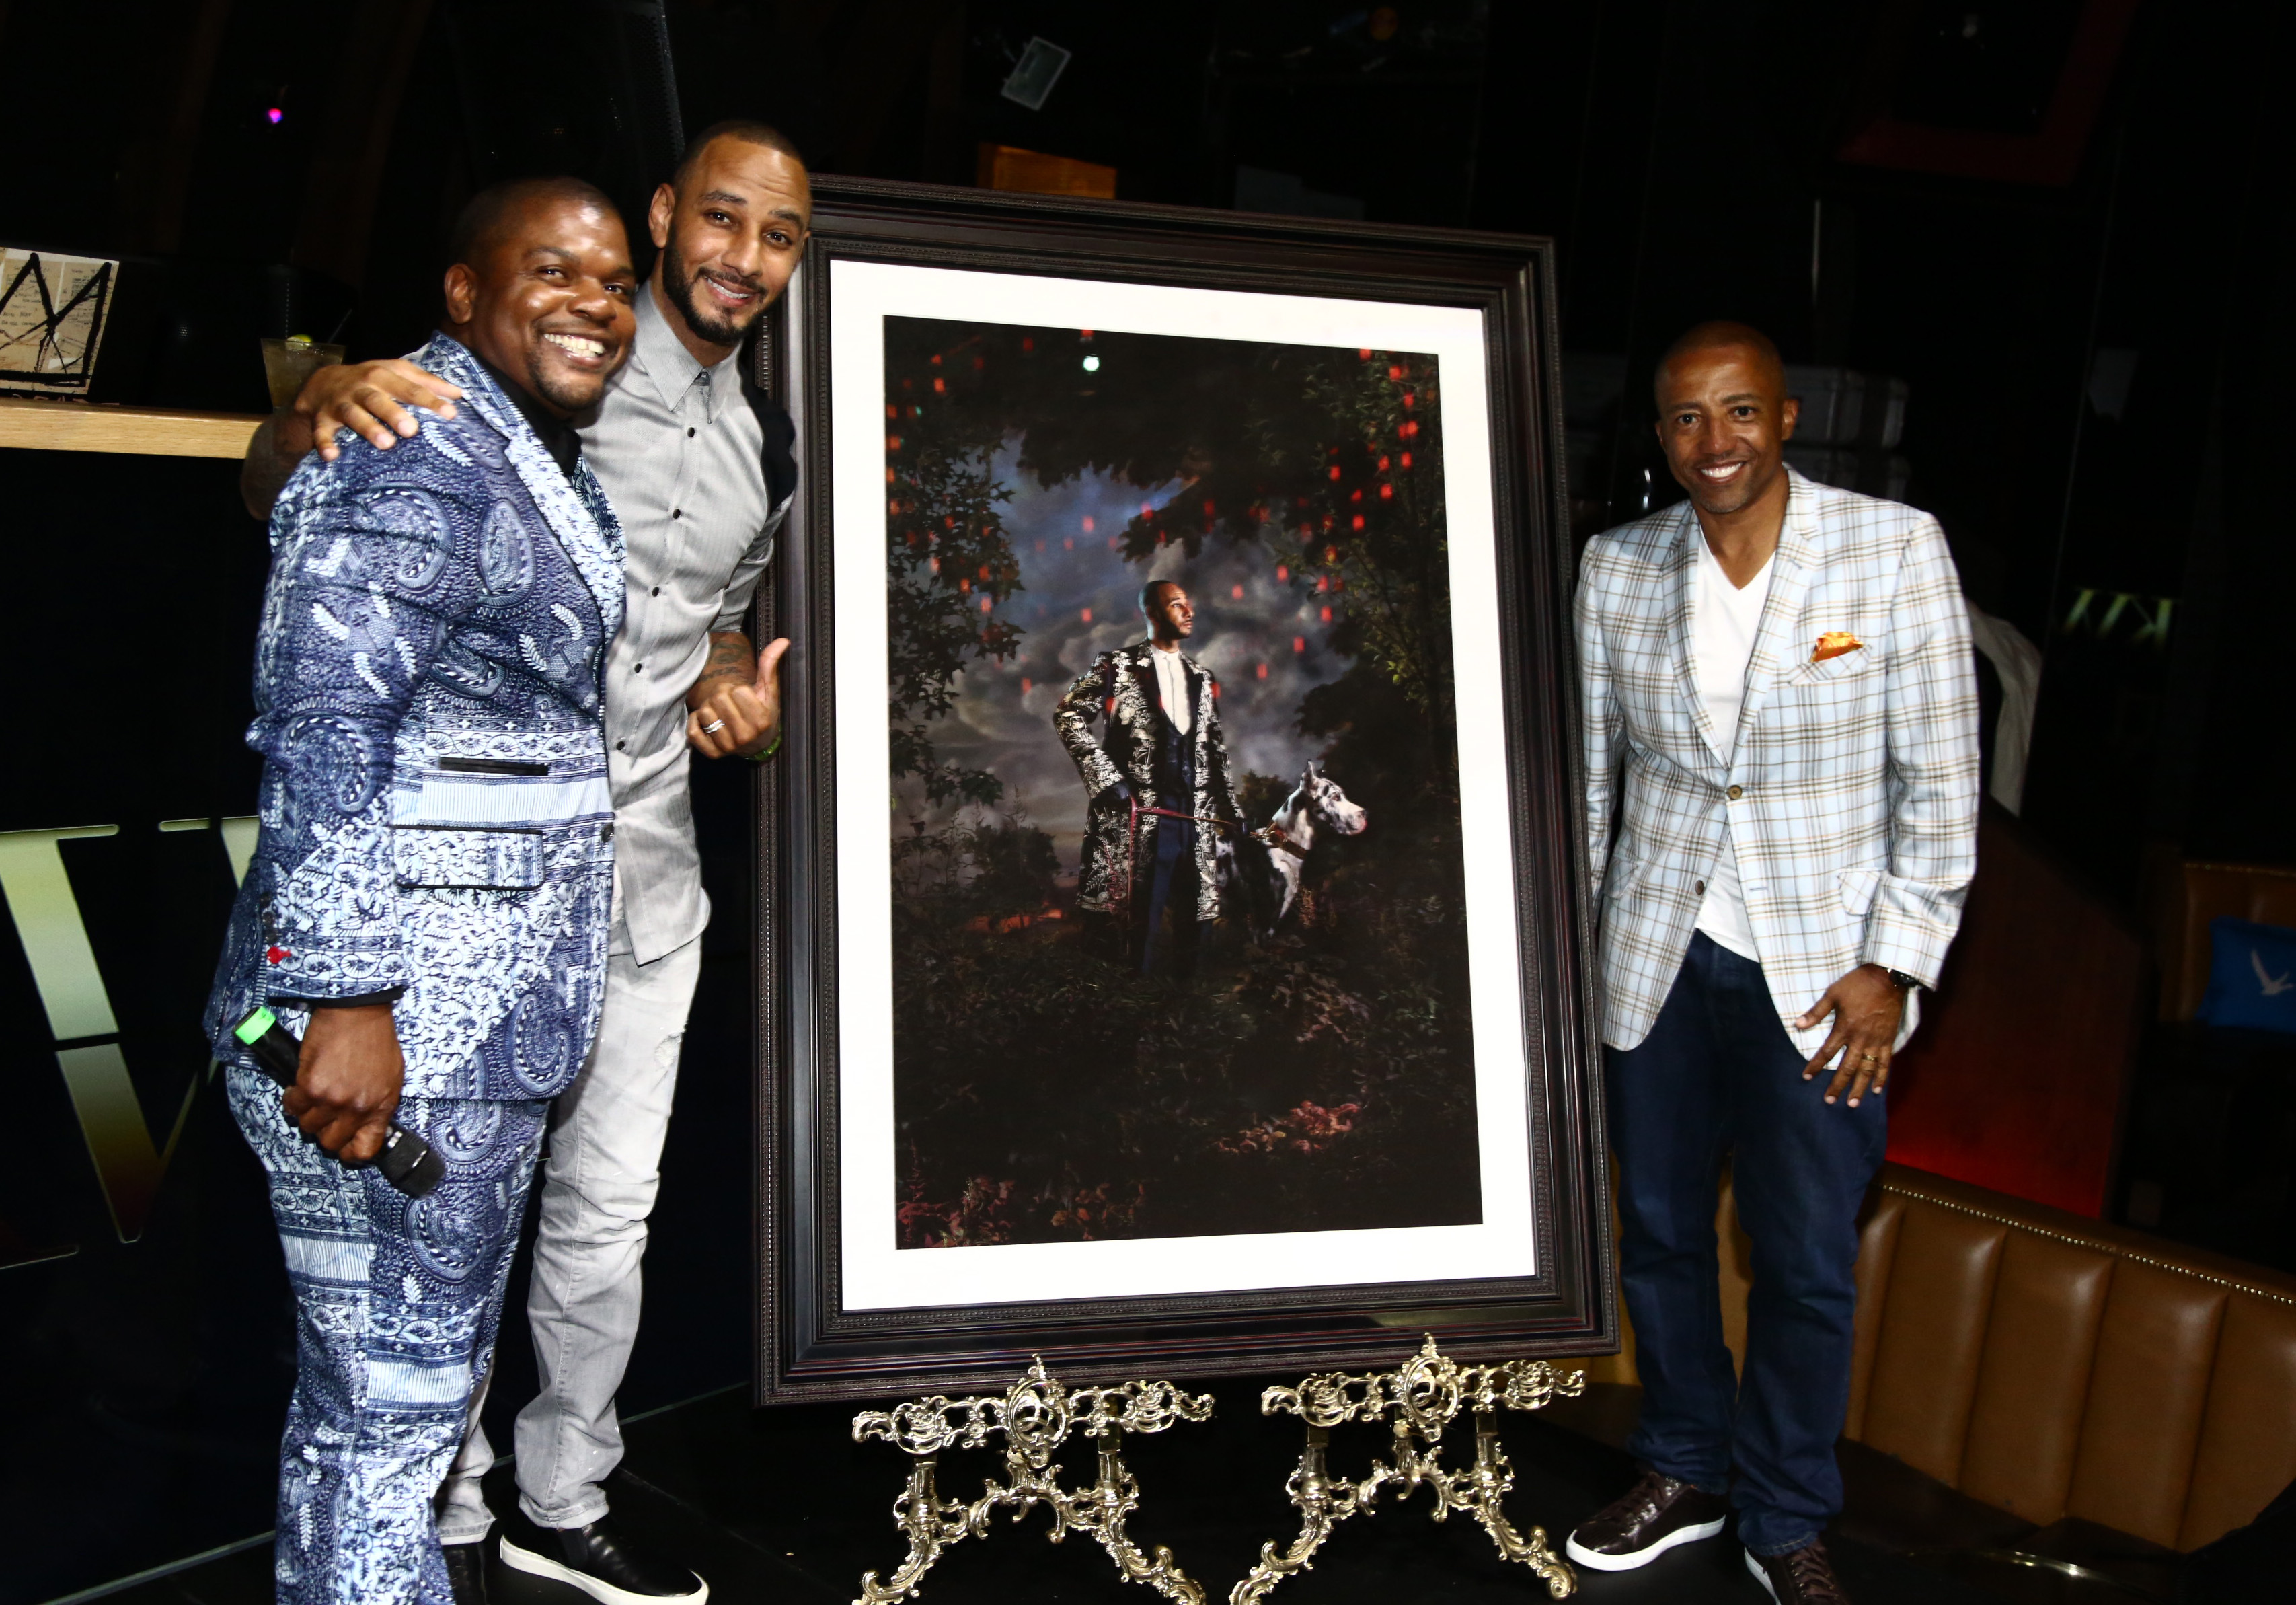 Kehinde Wiley, Swizz Beatz and Kevin Liles - GREY GOOSE Le Melon Toasts Musician Swizz Beatz With Art Commissioned By Award Winning Artist Kehinde Wiley